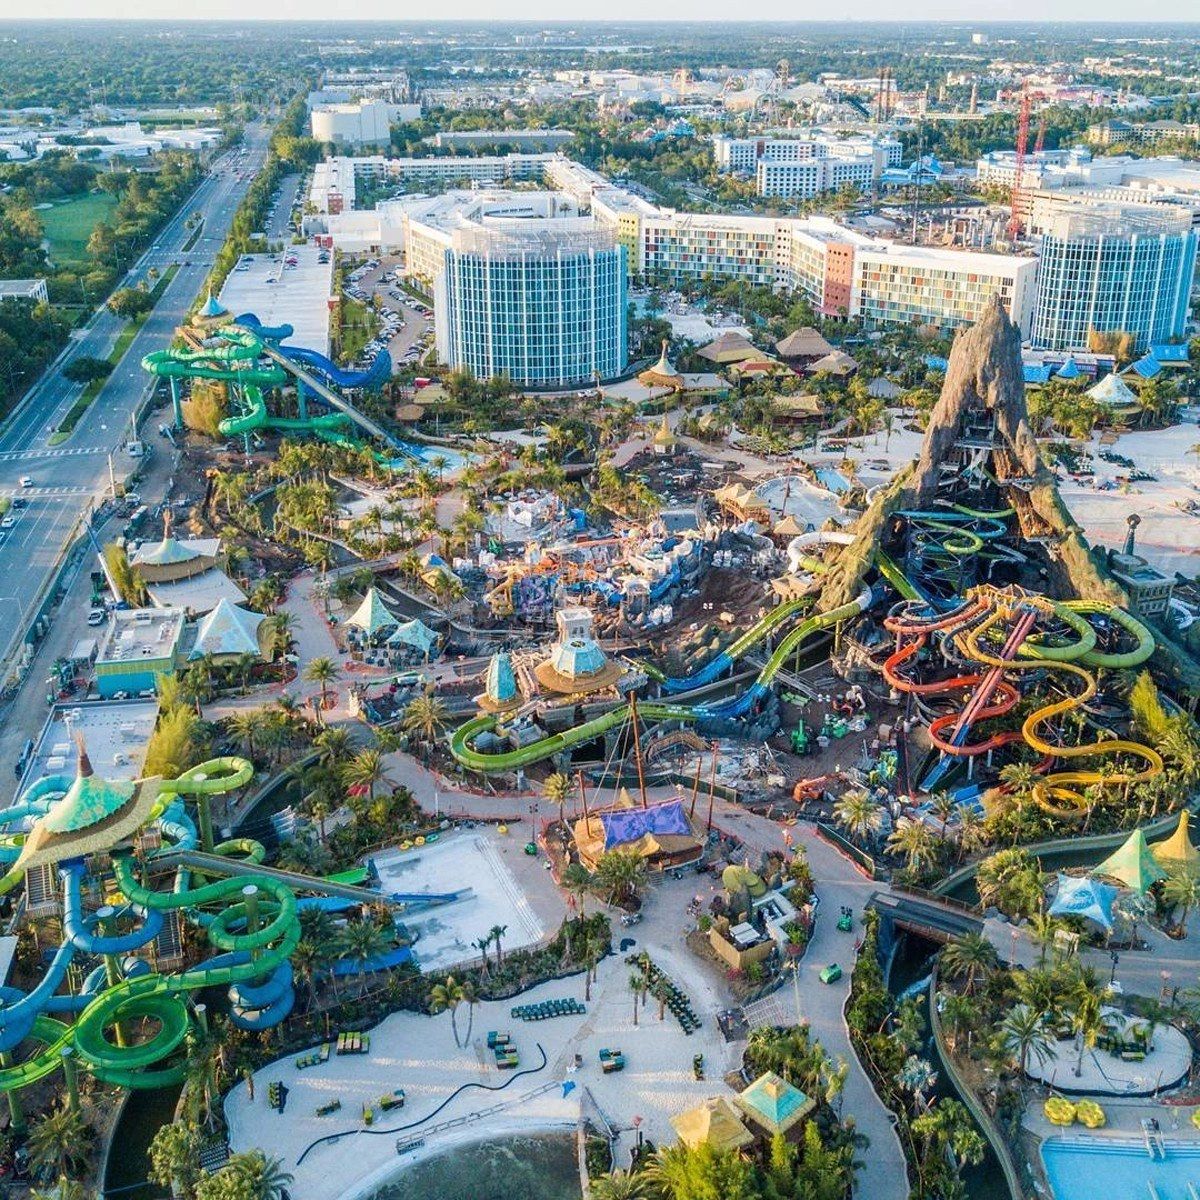 What's new in Orlando's theme parks?